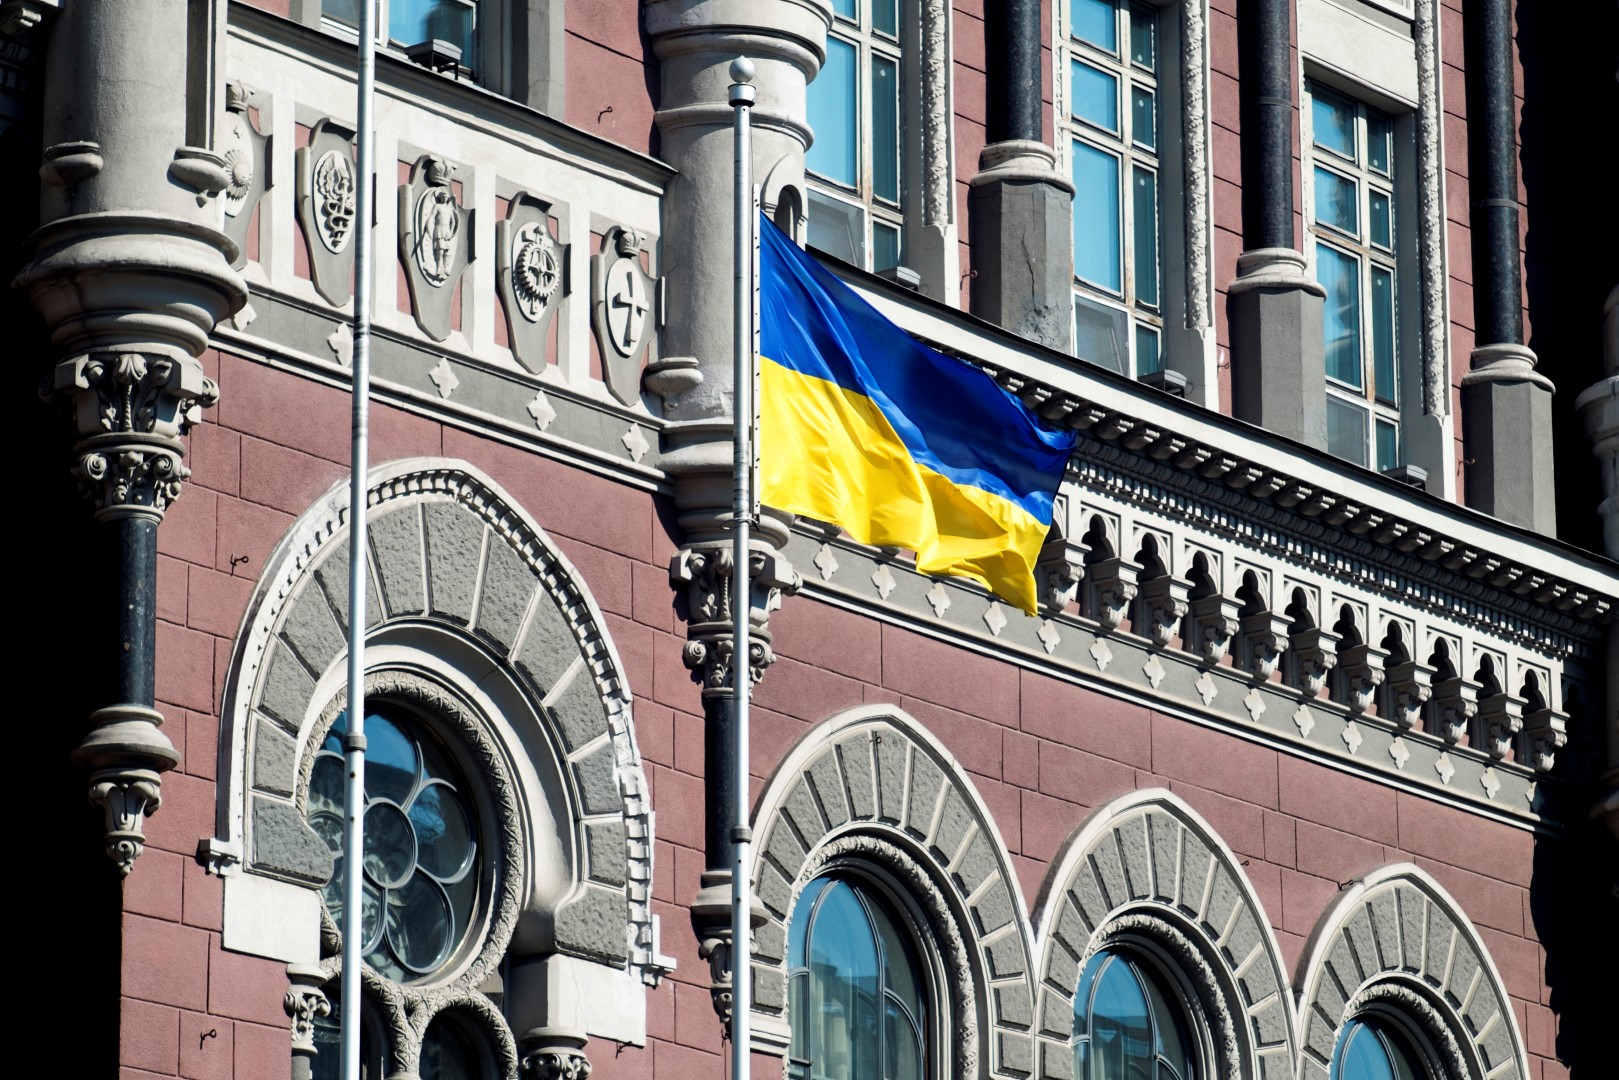 A Ukrainian national flag flies outside the Ukraine central bank in Kiev, Ukraine, on Friday, March 14, 2014. Ukraine's Eurobonds weakened and stocks headed for the worst week in seven on concern the conflict with Russia is intensifying two days before a referendum this weekend on the Crimean region's independence. Photographer: Vincent Mundy/Bloomberg